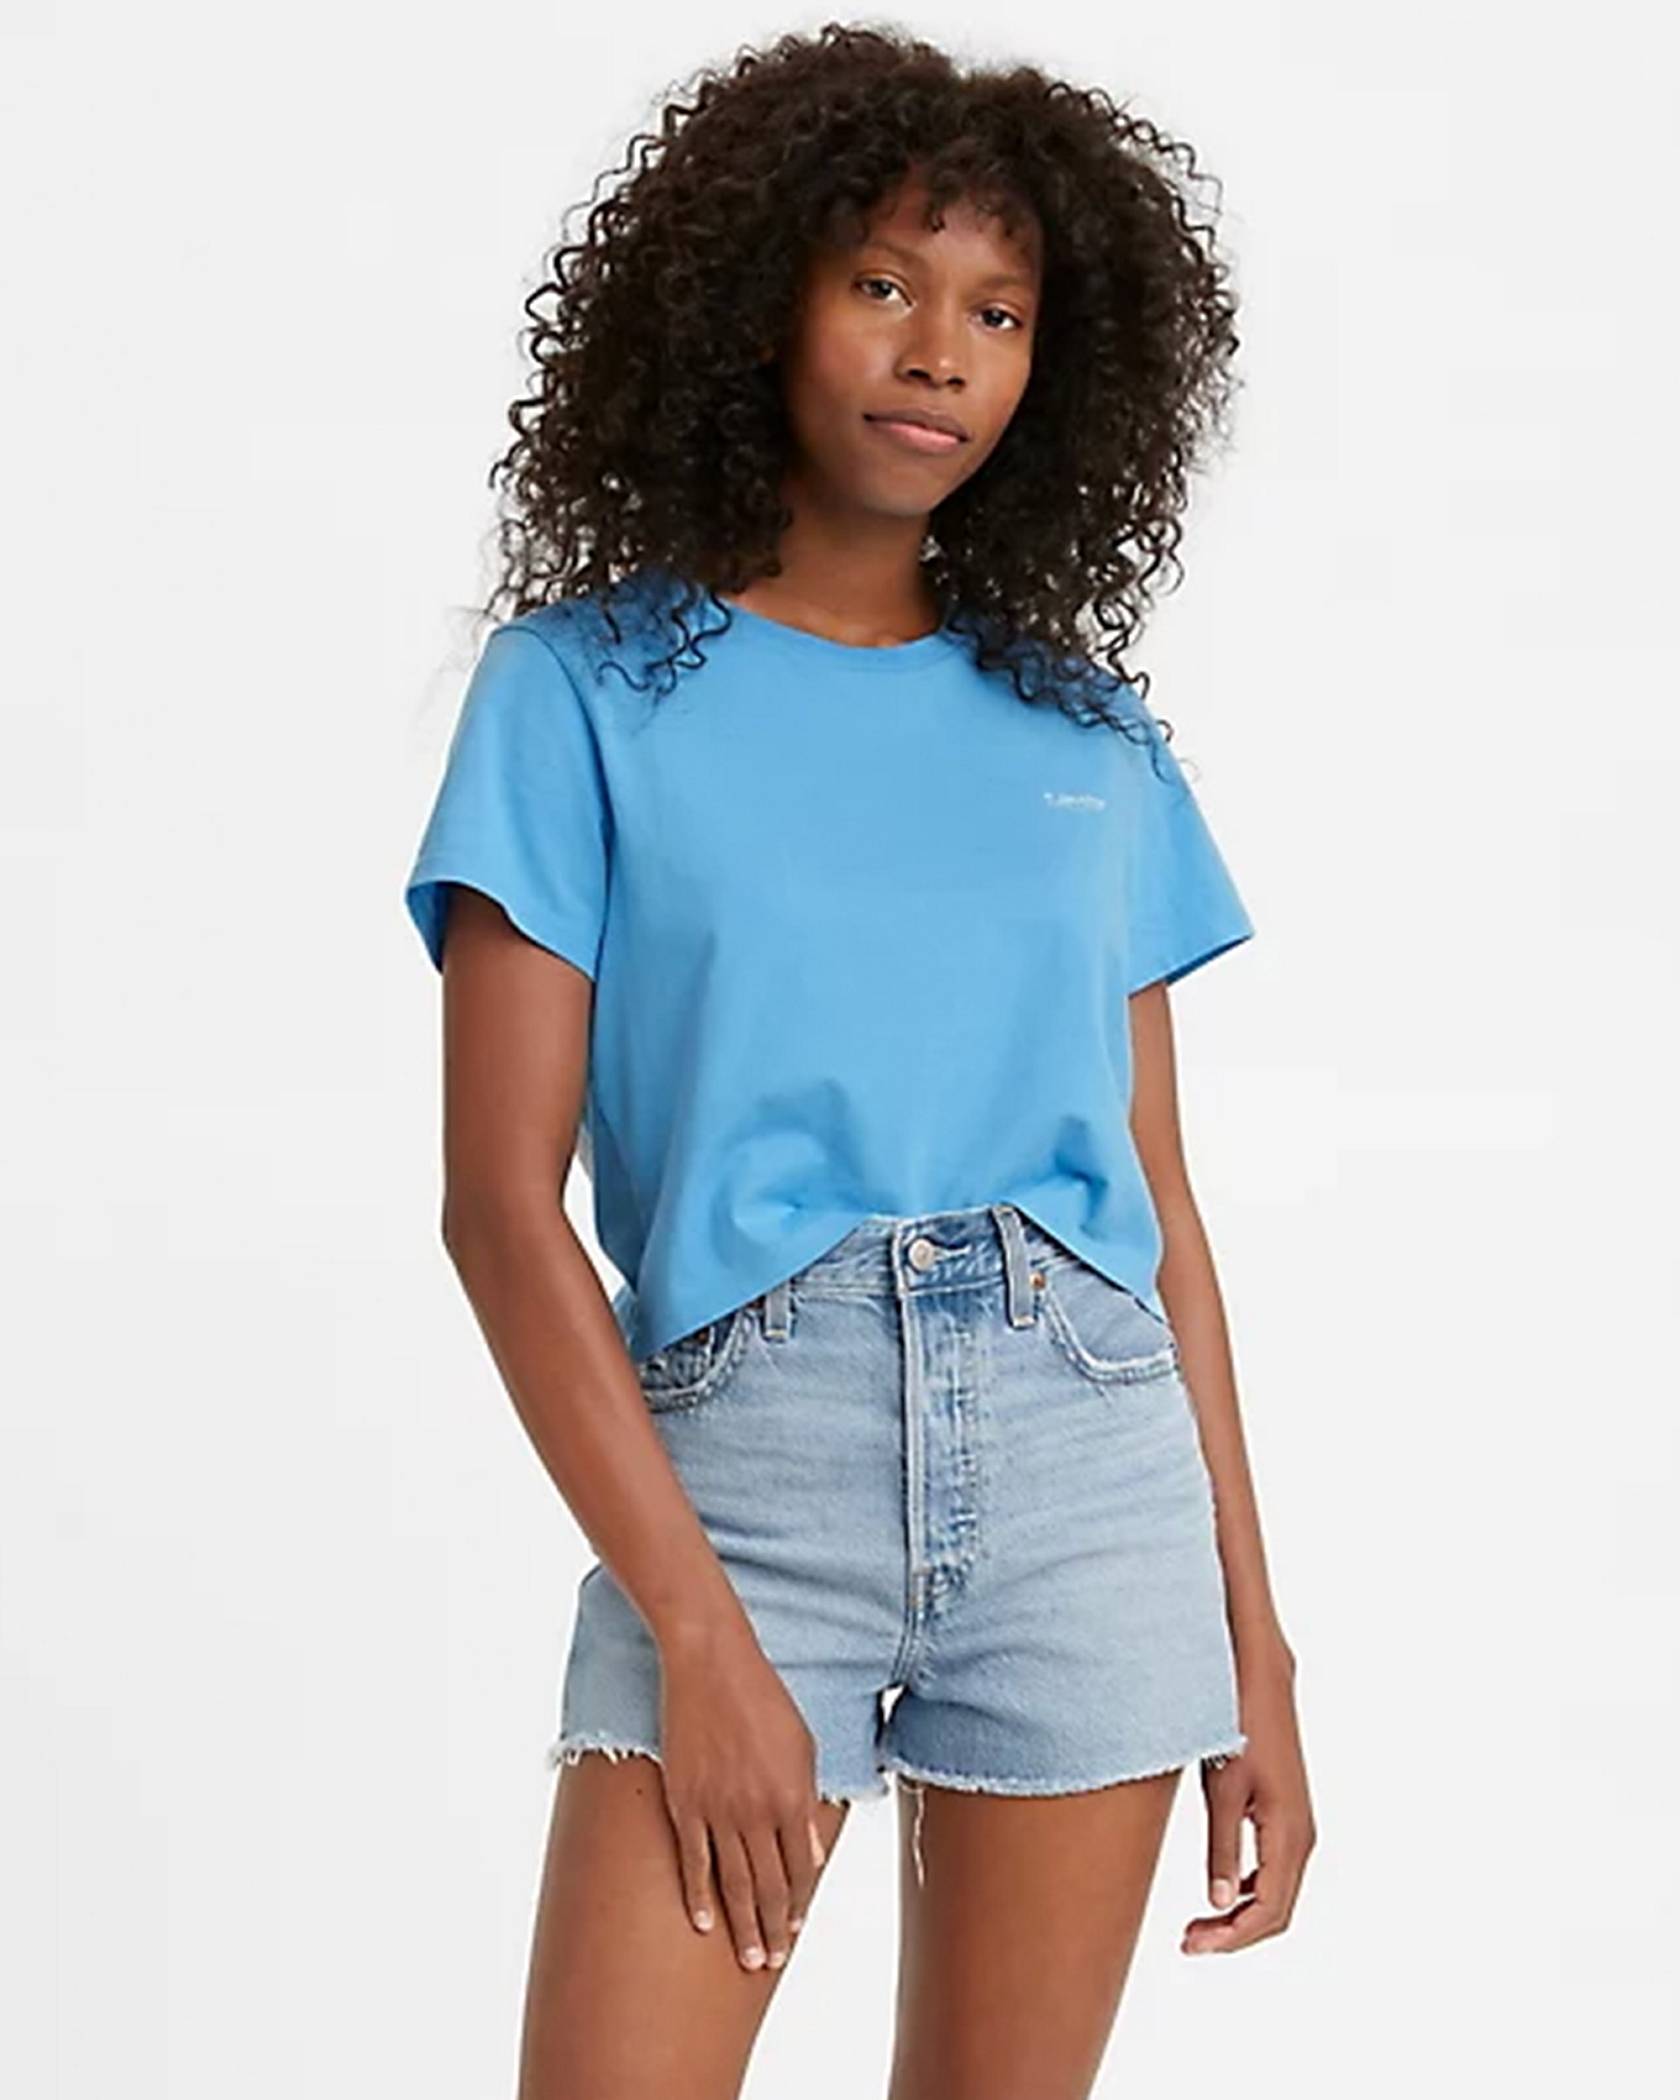 Levi's 501 Shorts: Which Women's Cutoffs Win? - The Mom Edit